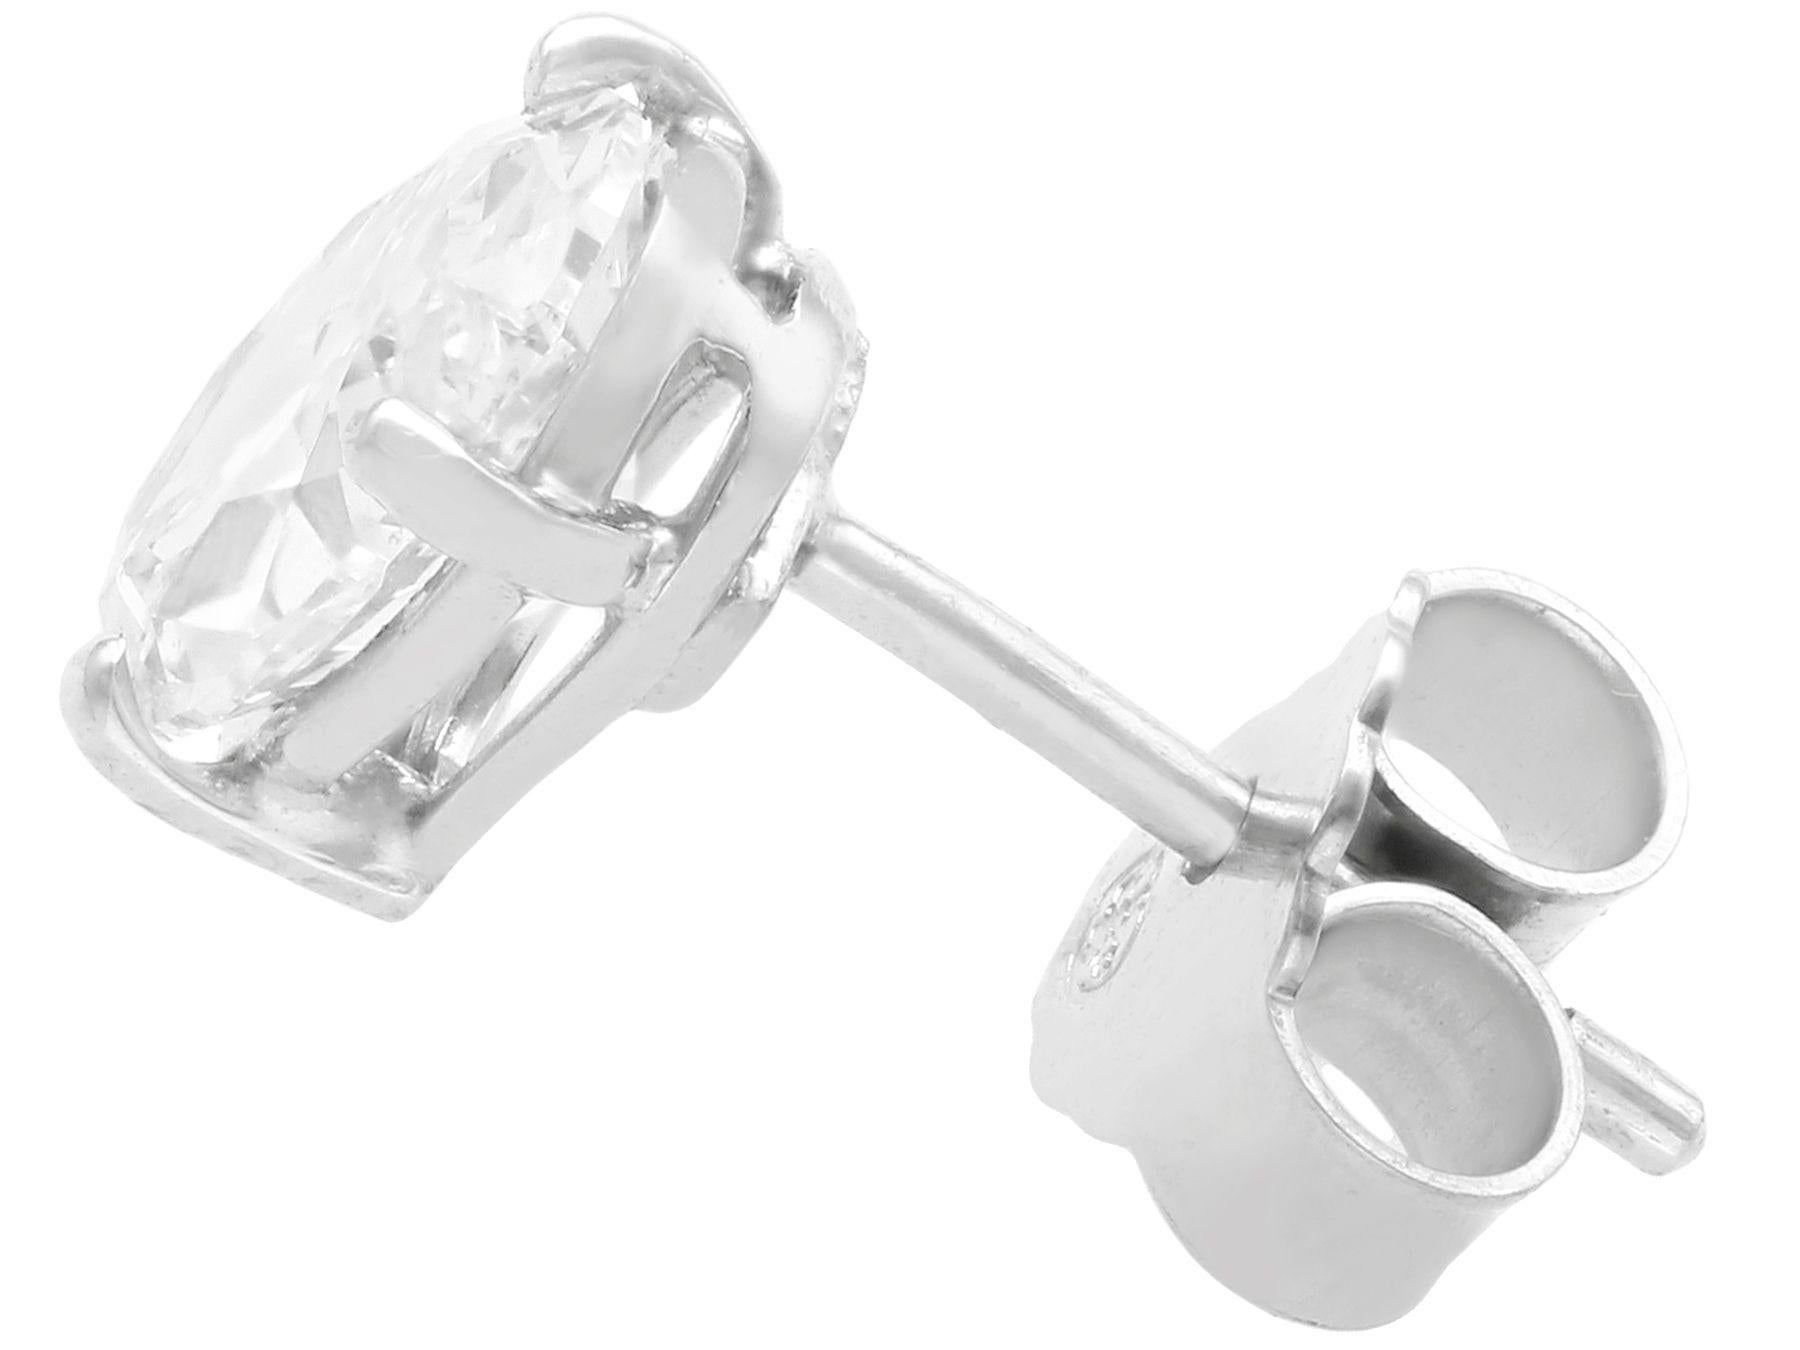 Oval Cut 2.35 Carat Diamond and White Gold Stud Earrings